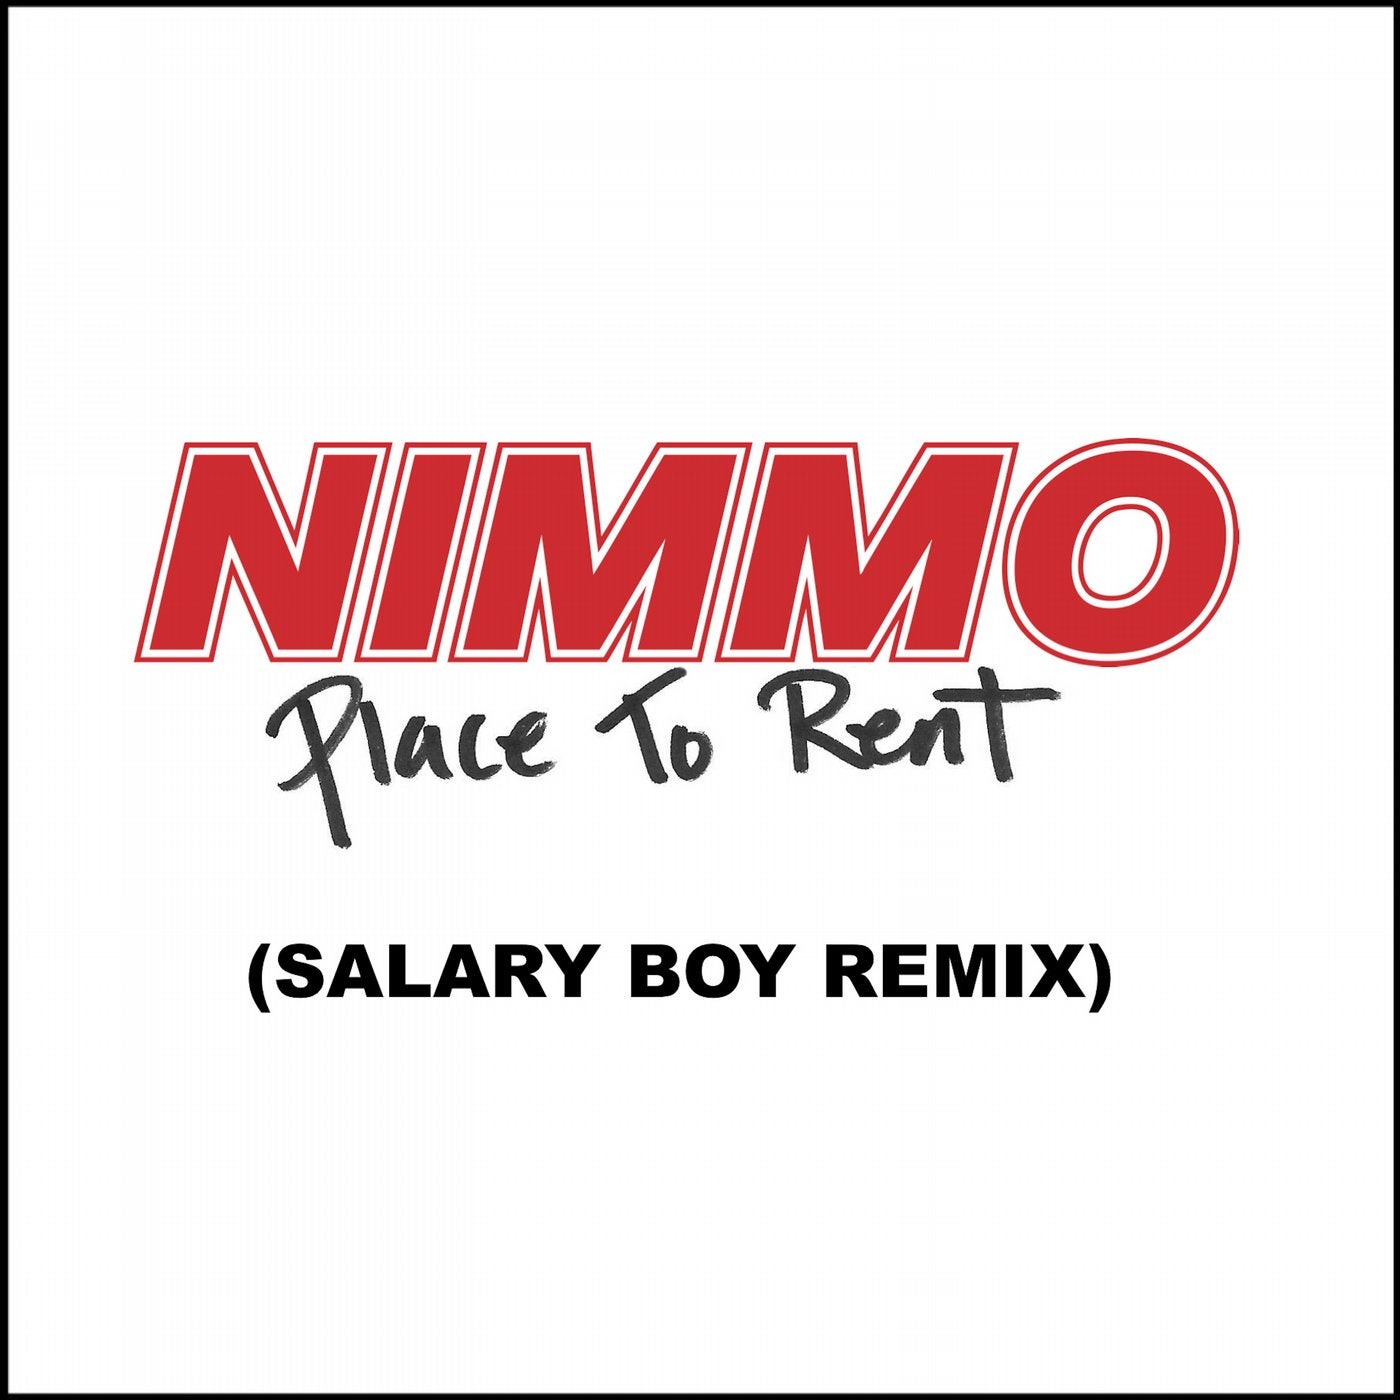 Place to Rent (Salary Boy Remix)